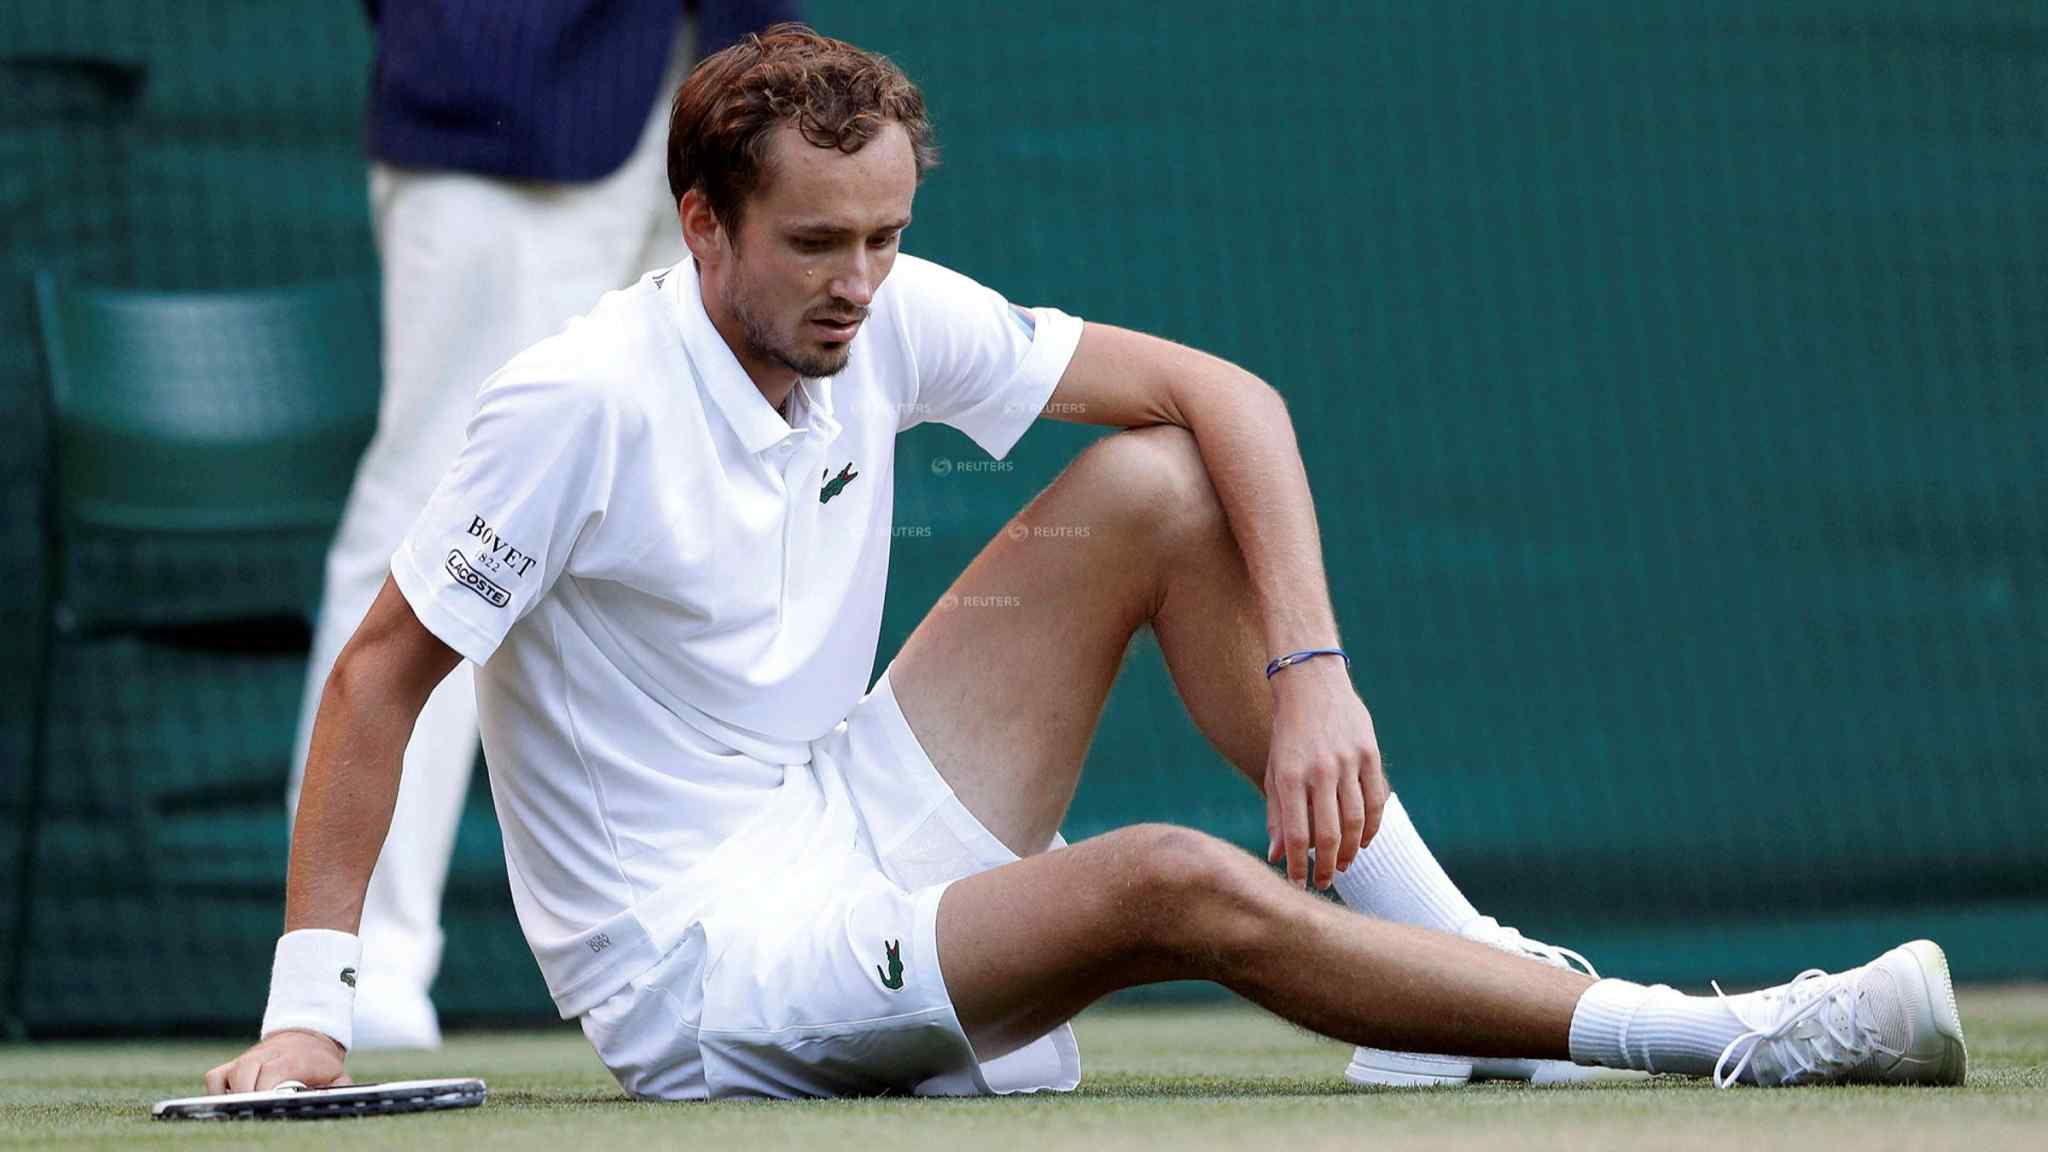 Live news: Wimbledon stripped of ranking points by ATP and WTA over Russian player ban